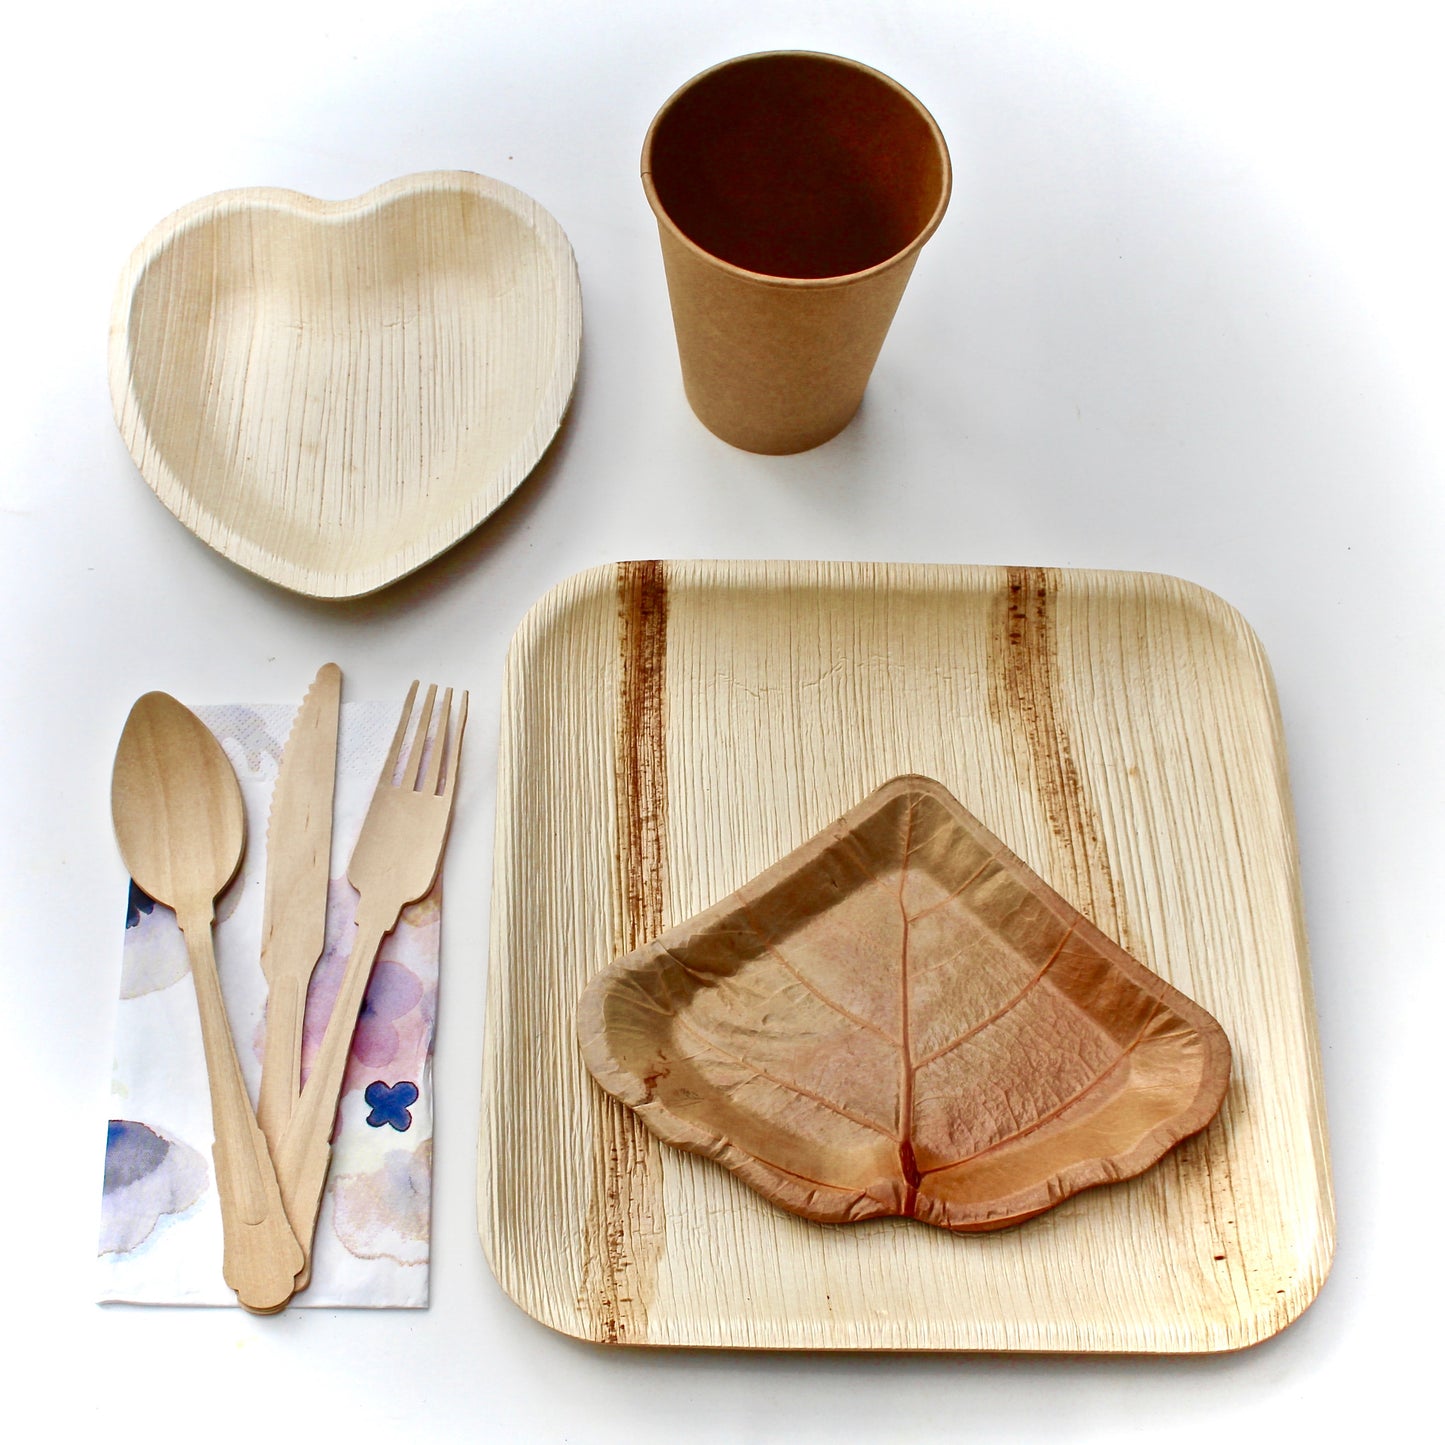 Bamboo Type Palm Leaf Plate 20 Pic 10" Deep Square - 20 Pic Sea grape 7" Dessert plate - 60 pic Utensils - 20 Pic Heart ^" - 20 Pic cup - 20 pic Napkin